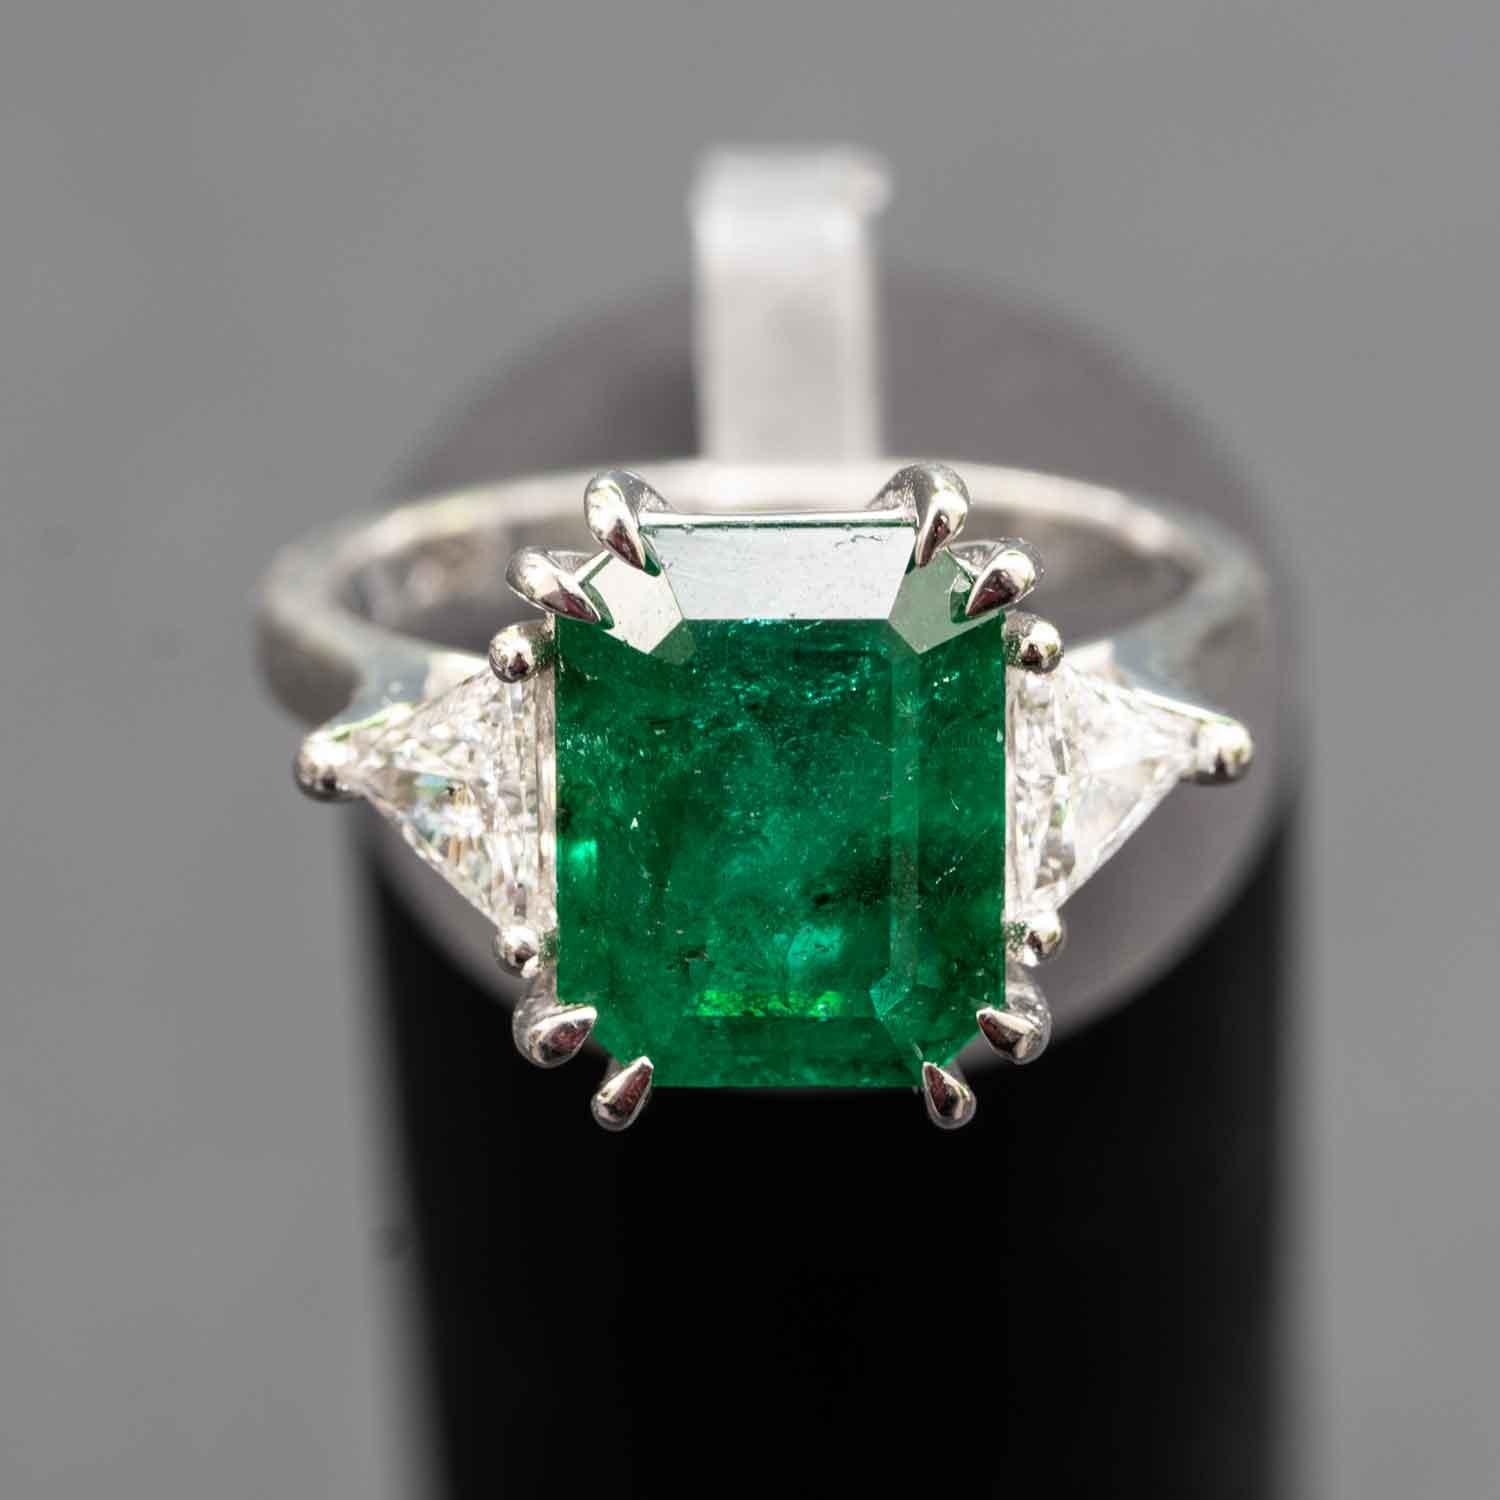 18K gold, 5.15gr

Natural Emerald Beryl
Shape and cutting style : Emerald
Measurements: 11.15mm X 8.73 mm X5.93 mm 
Carat weight : 3.68
Color grade : VIvid Green
Cut grade : very good

Natural Diamonds
Shape: triangle
Number of stones 2
Carat weight